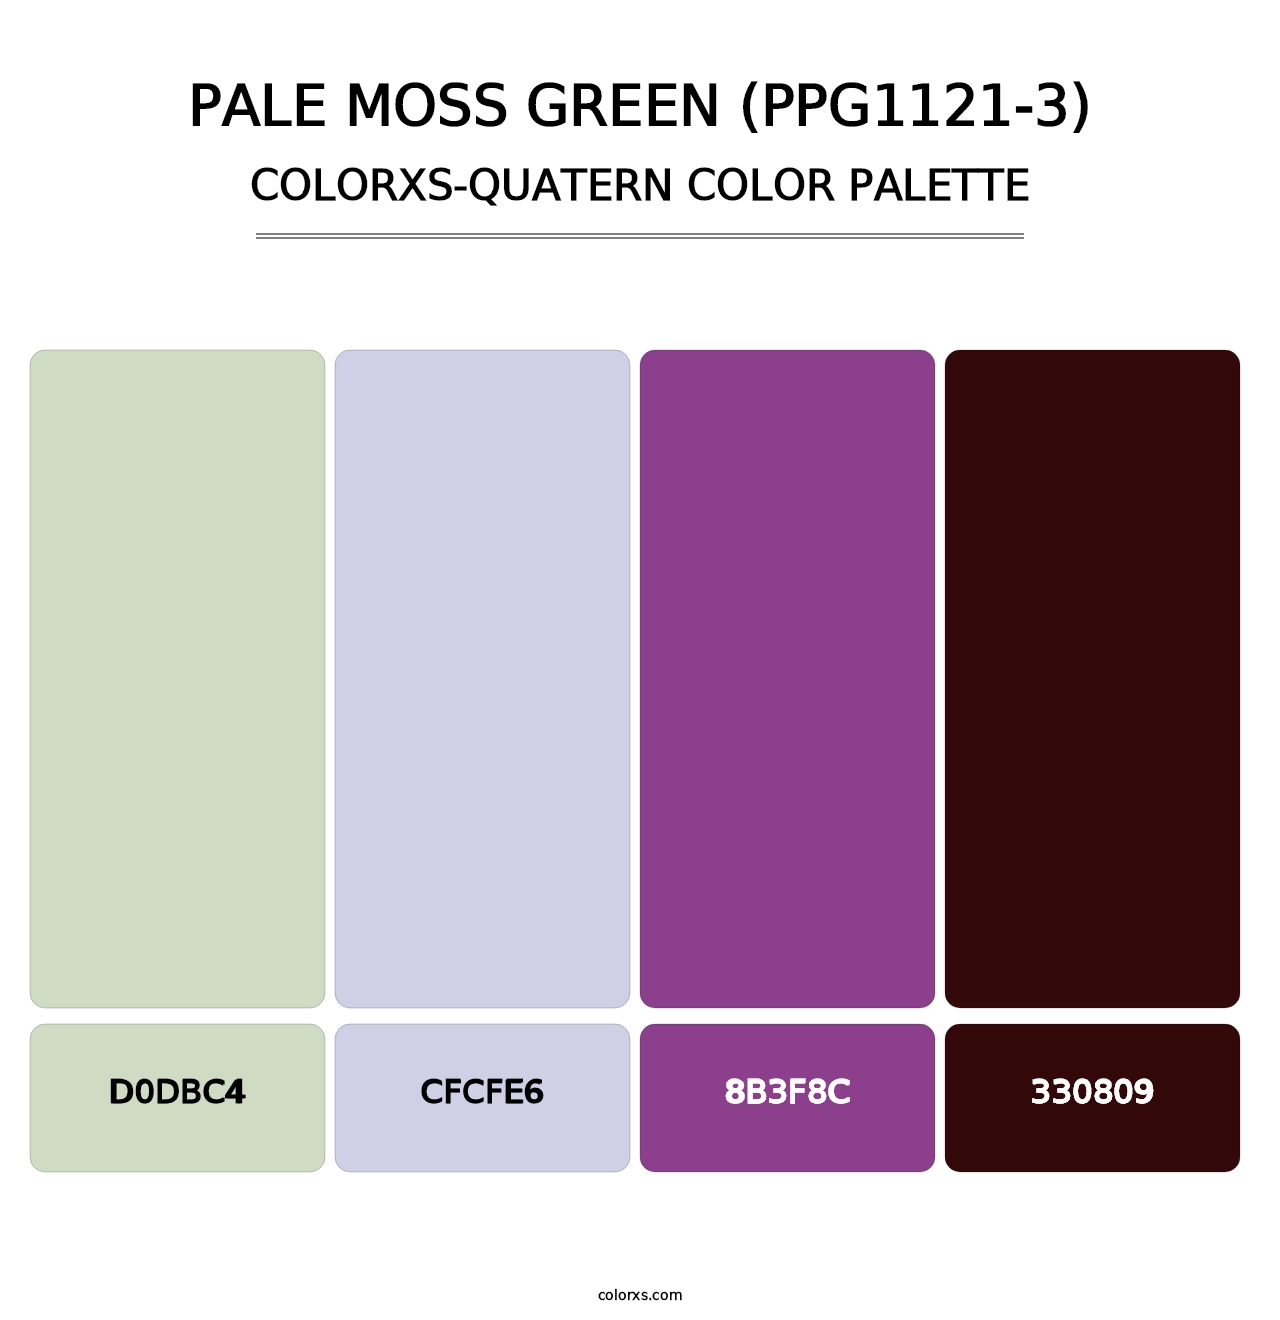 Pale Moss Green (PPG1121-3) - Colorxs Quatern Palette